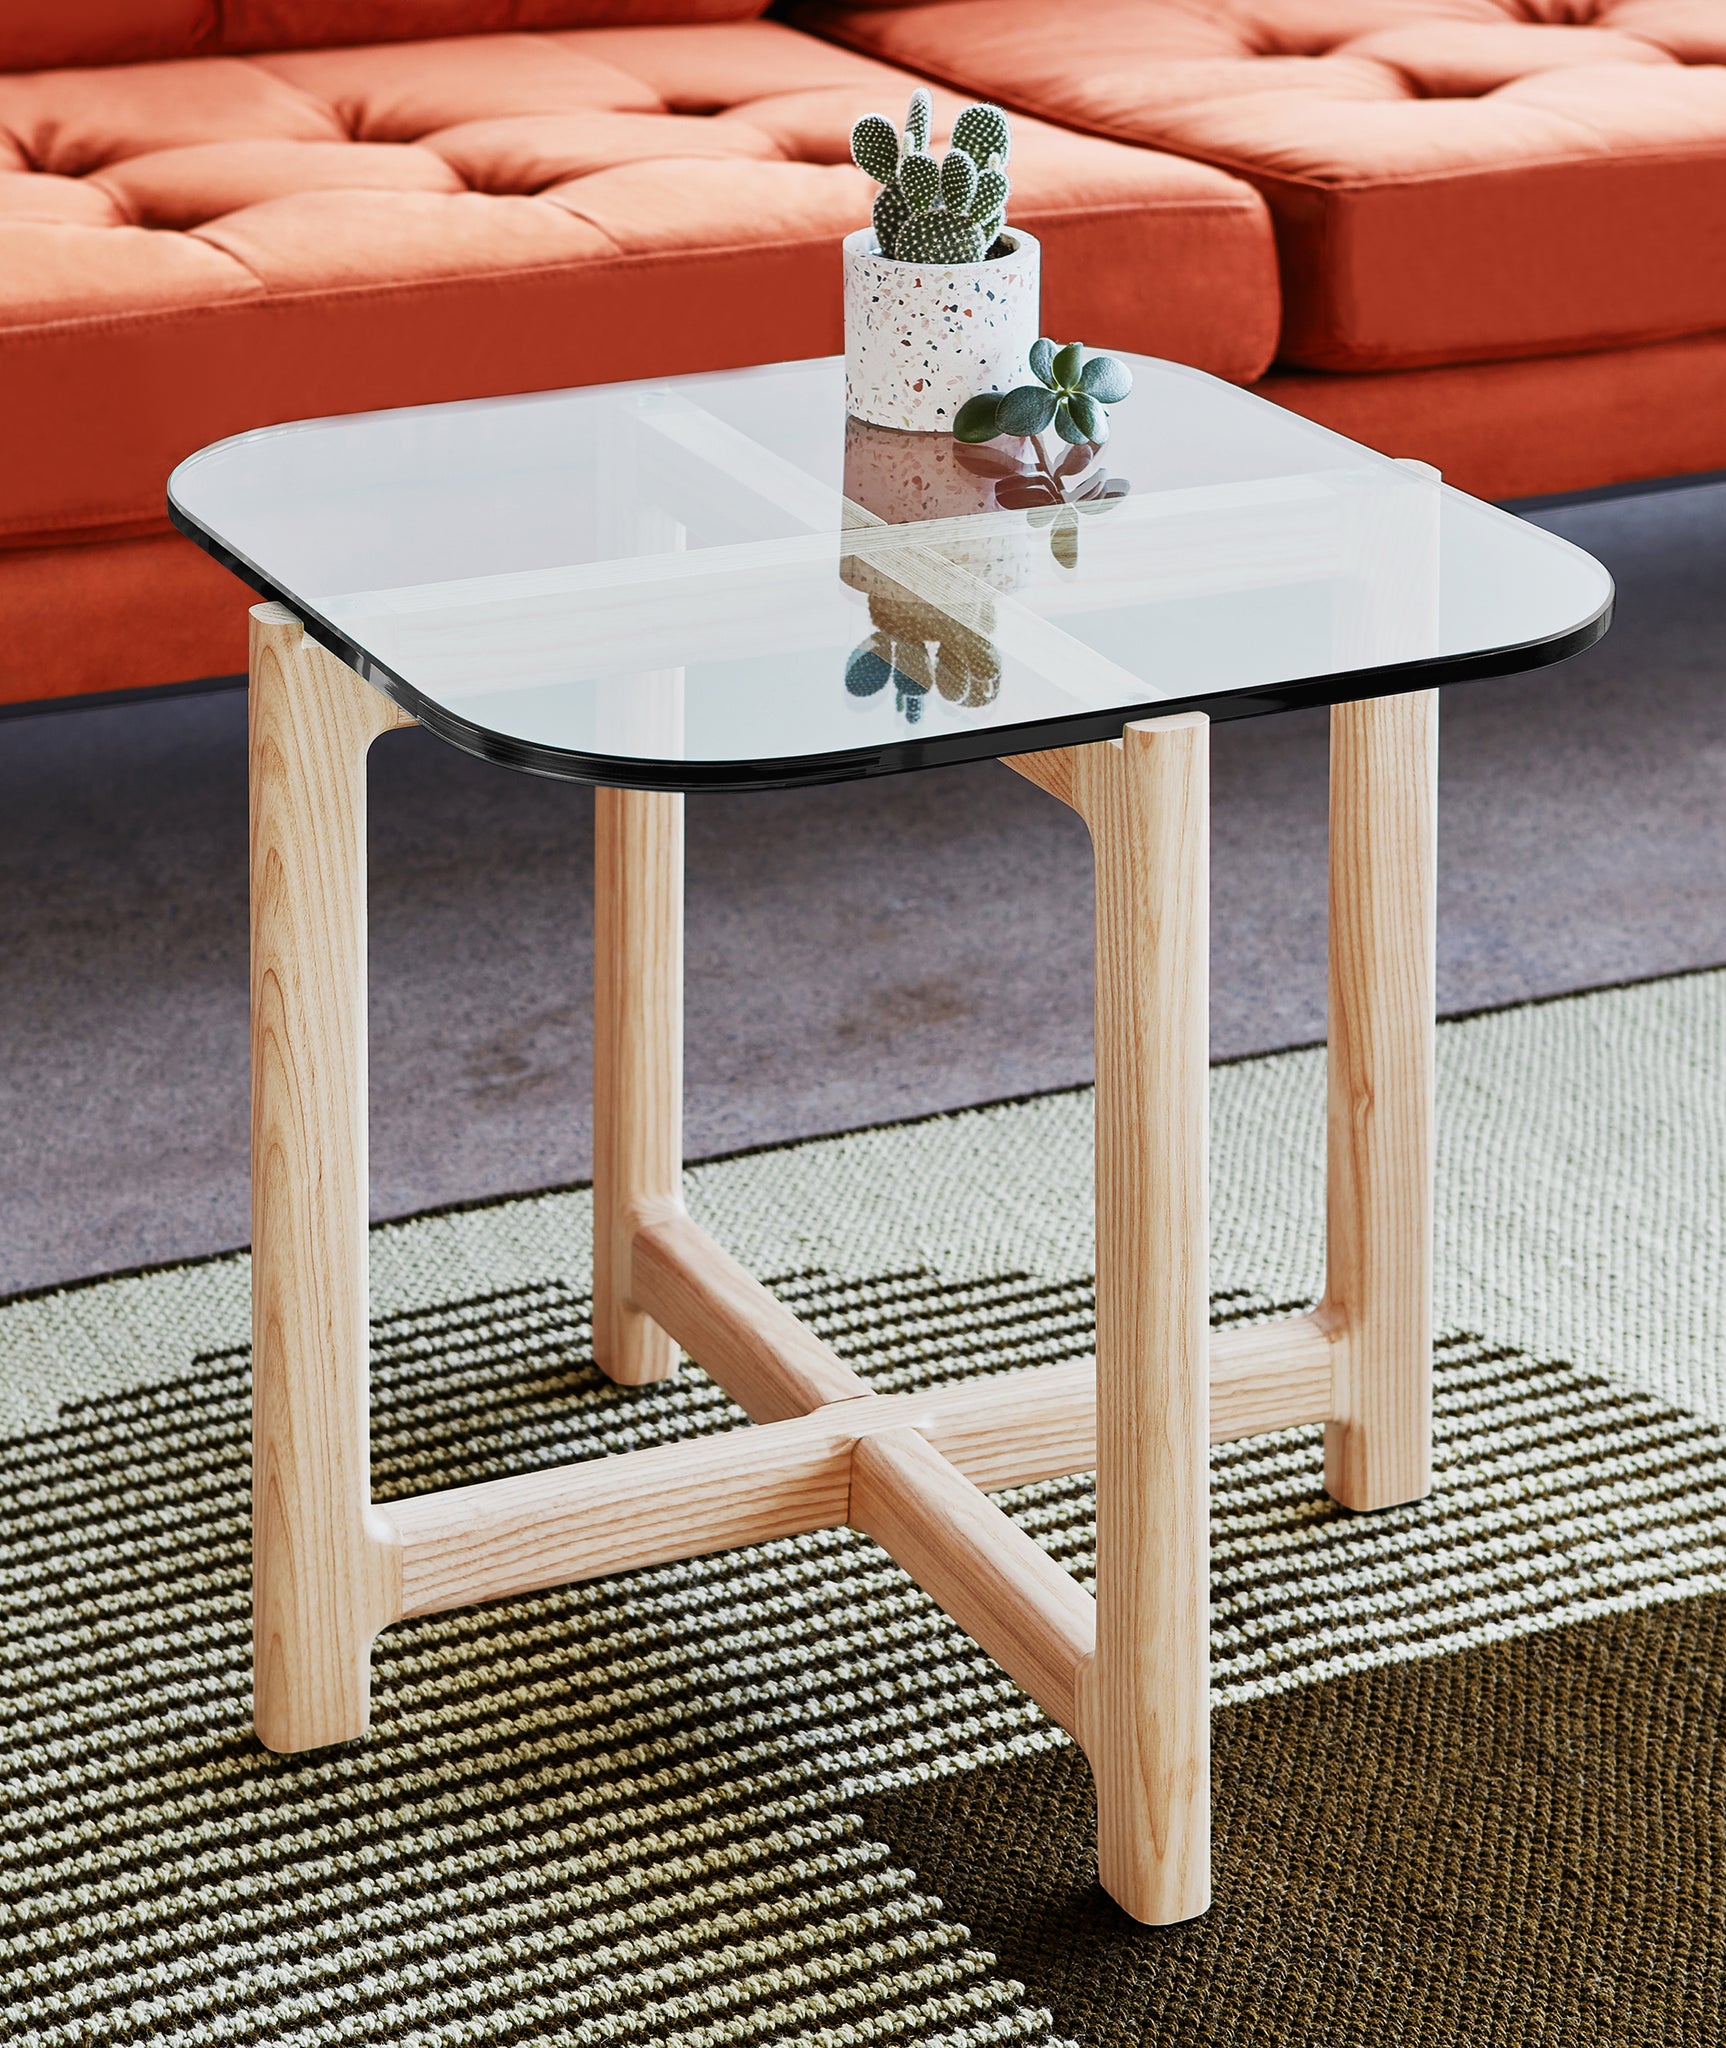 Quarry End Table - More Options